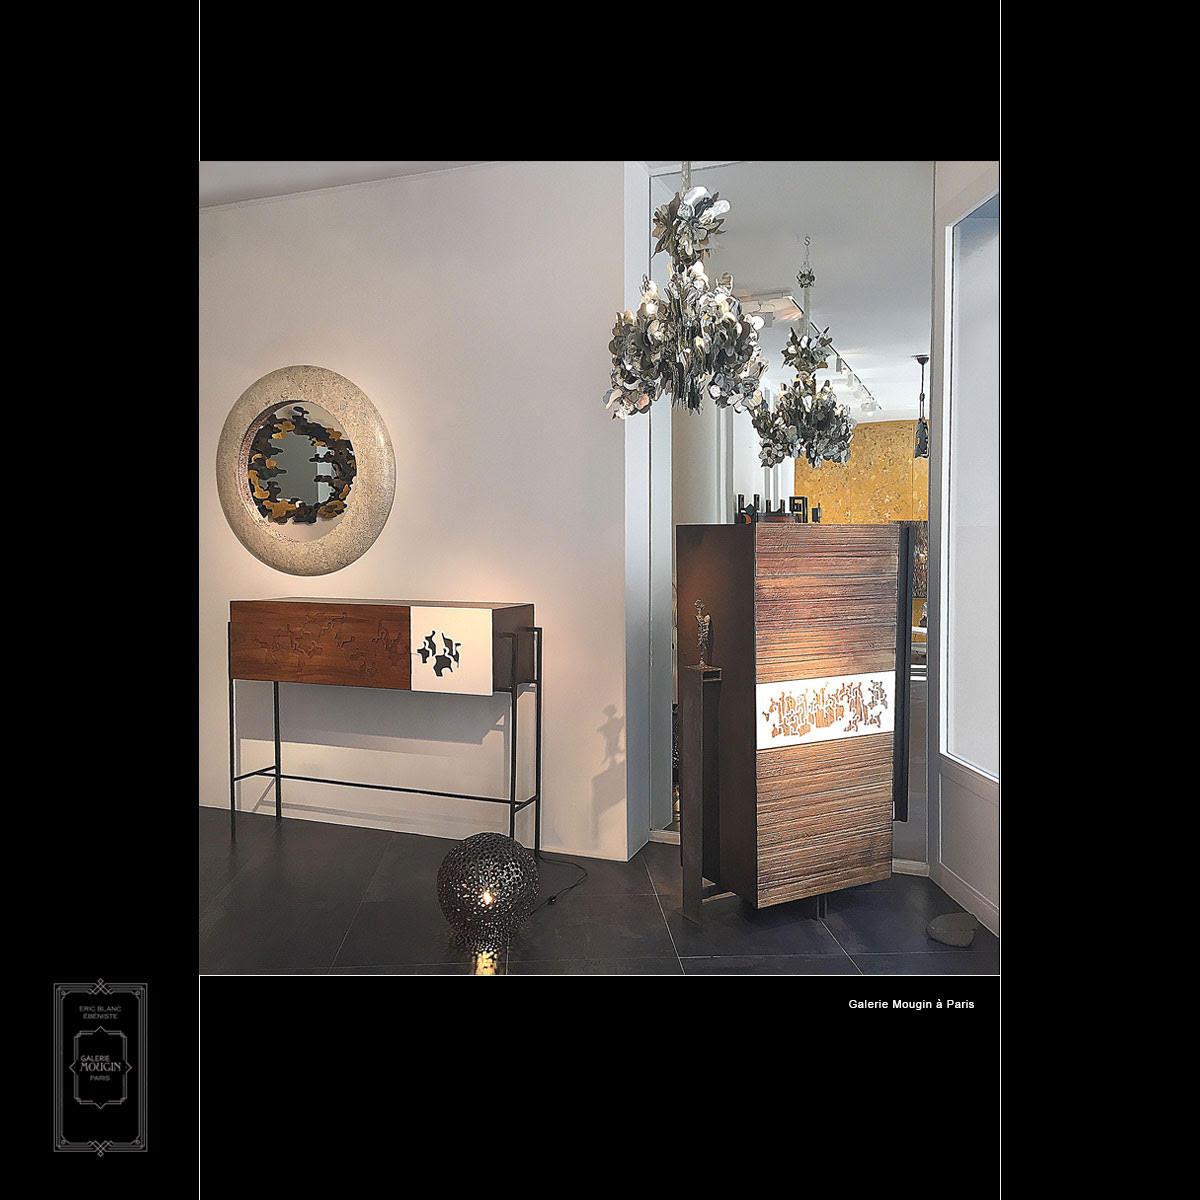 This is a beautiful cupboard with interior shelves handmade and designed in France by Eric Blanc. The front is covered with a unique artwork by artist Gaetan de Seguin. It is a captivating piece of furniture, elegant and minimalistic in its design.